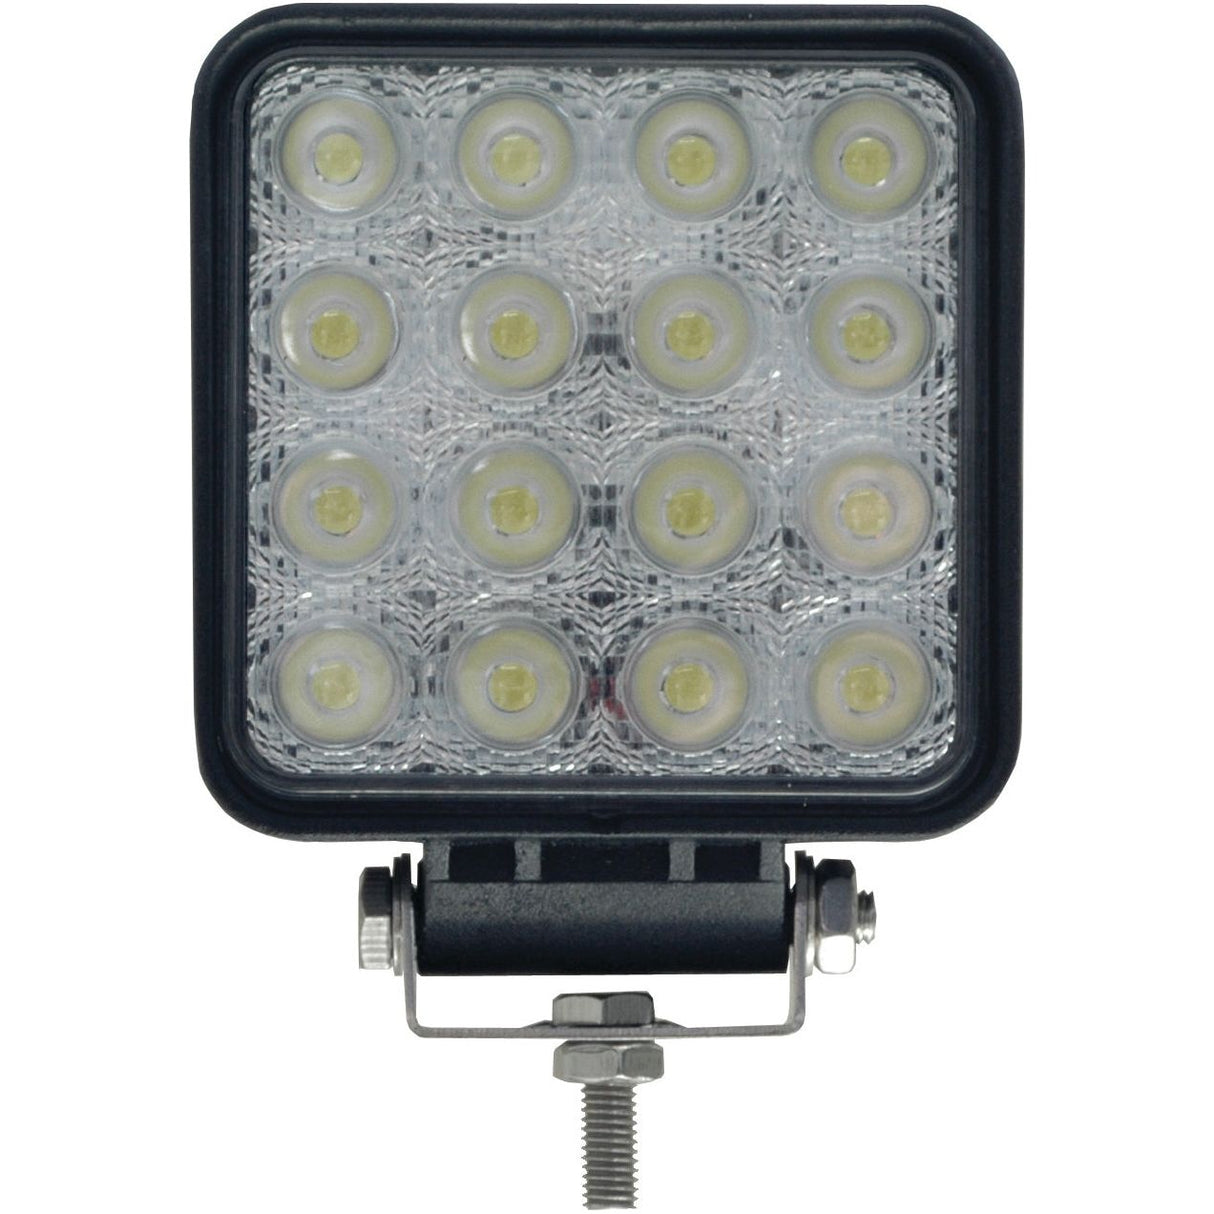 LED Work Light, Interference: Class 3, 2880 Lumens Raw, 10-30V ()
 - S.129484 - Farming Parts